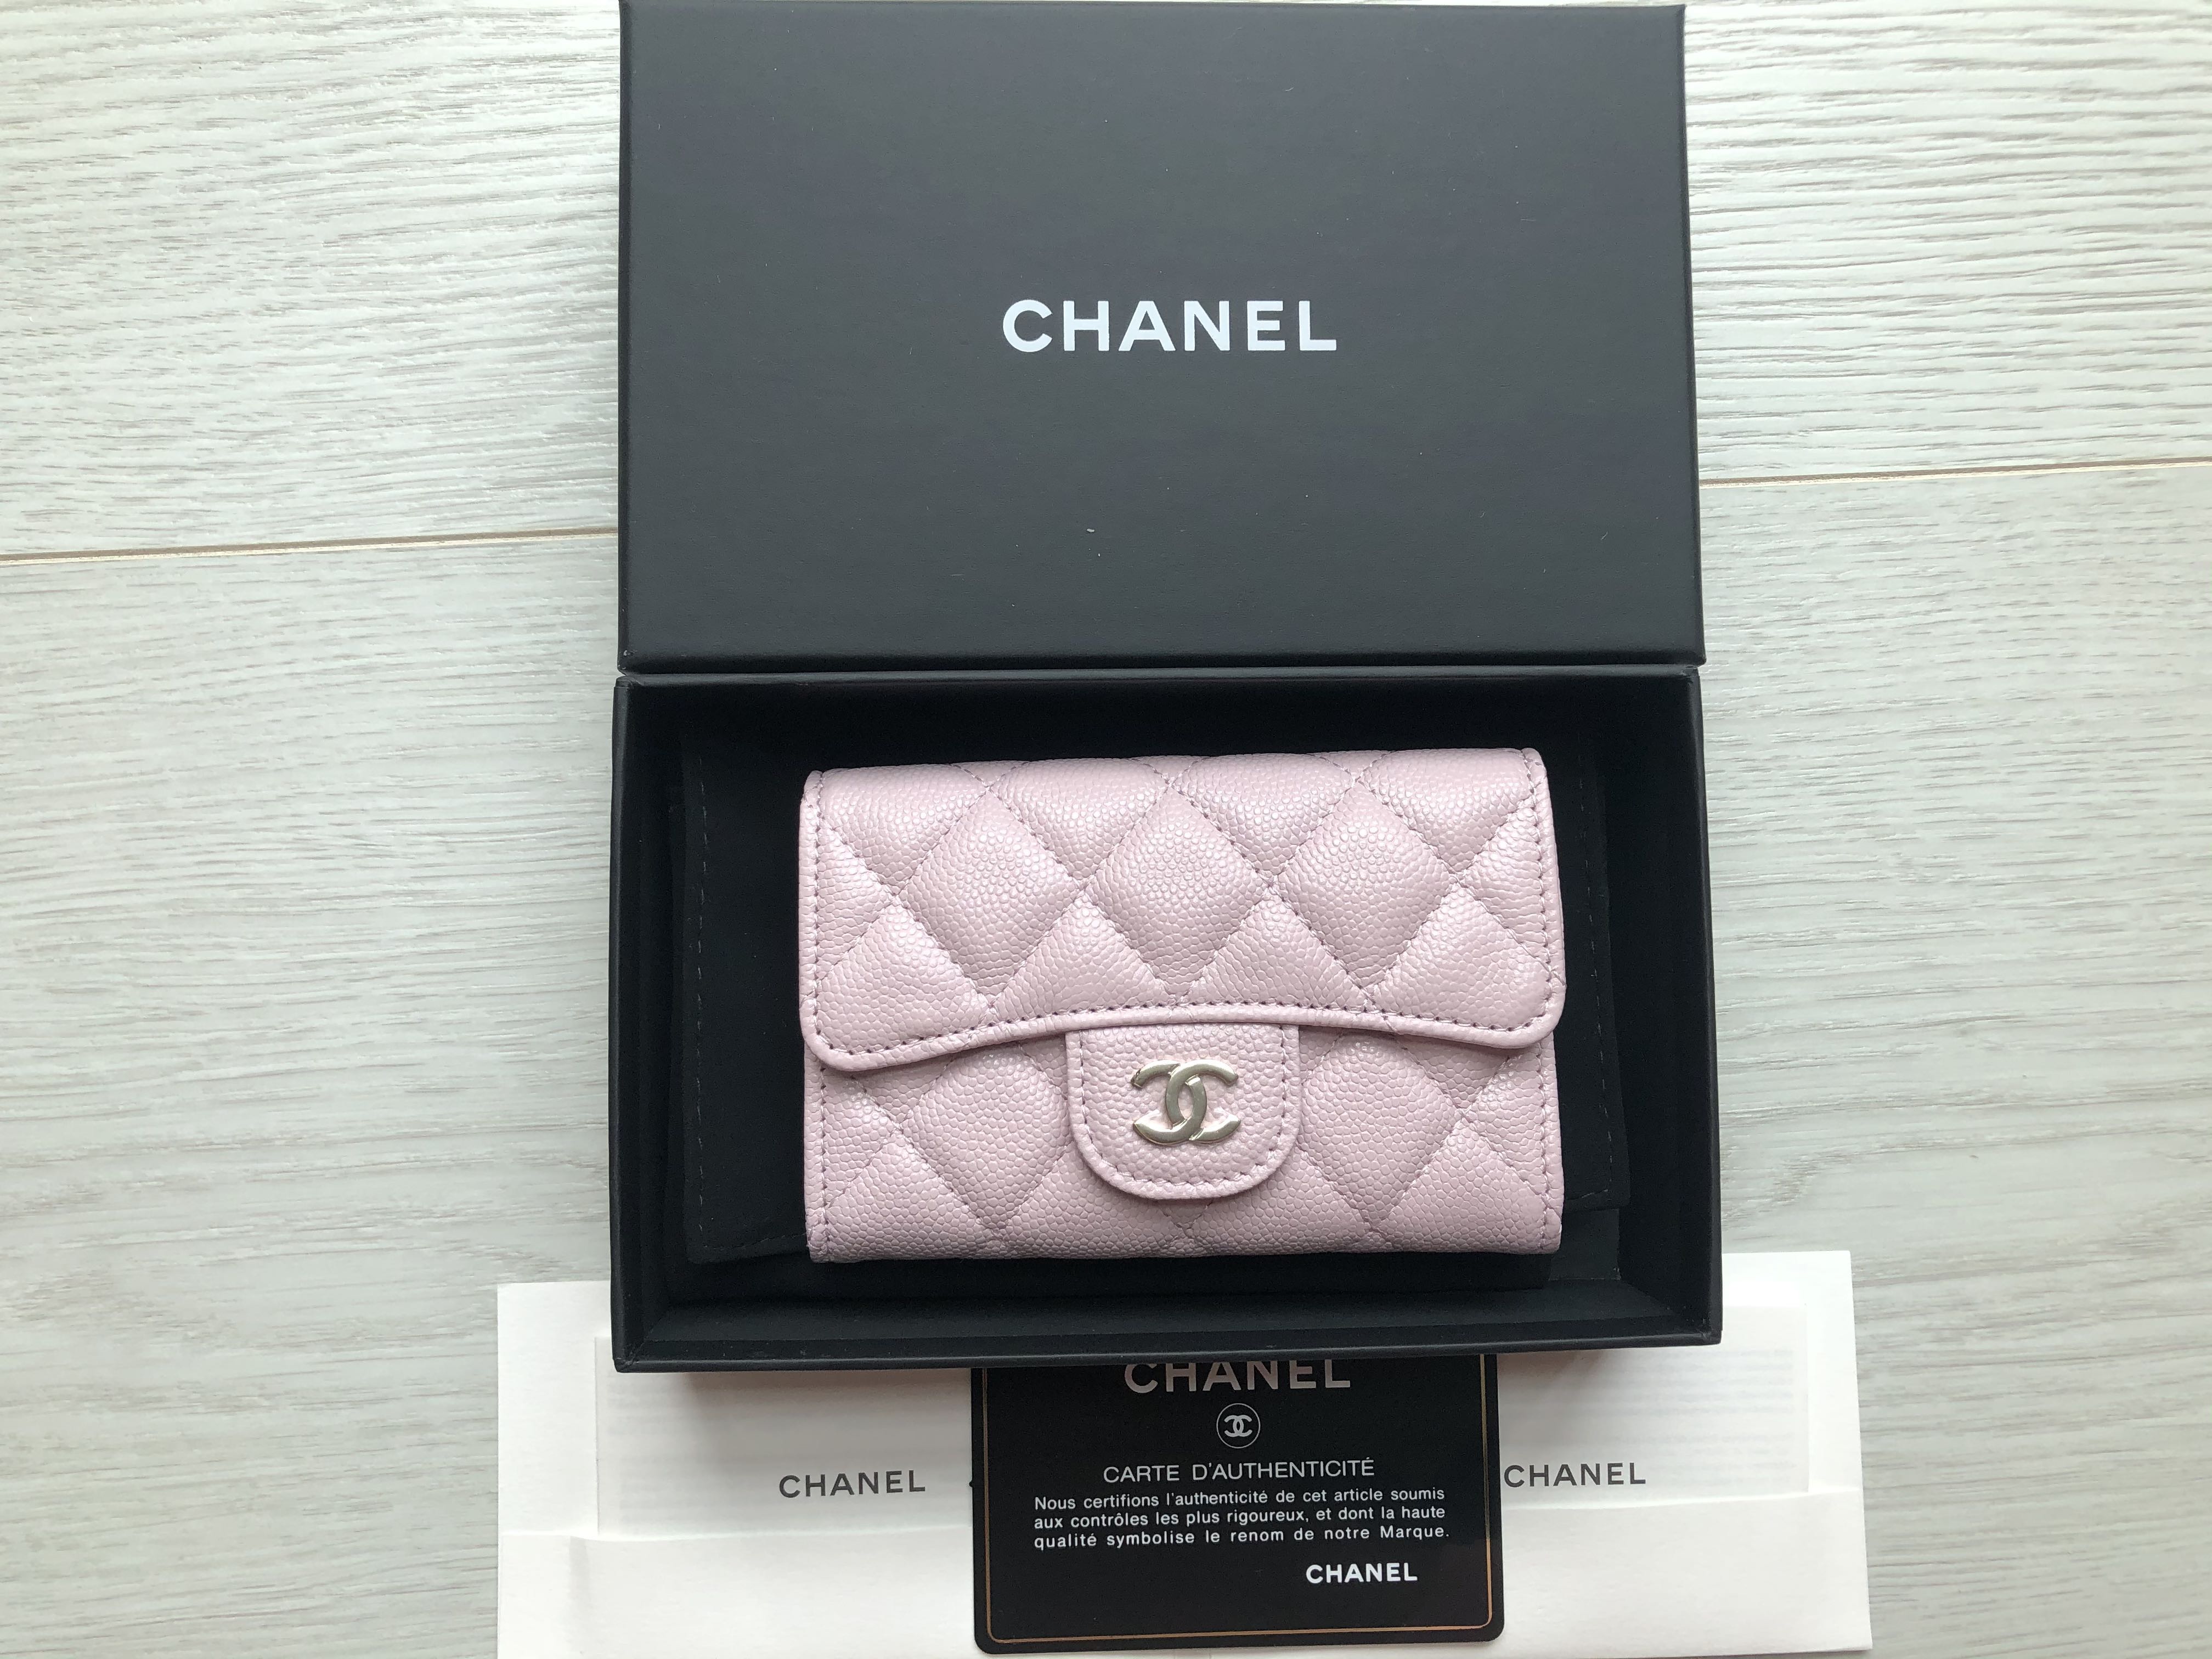 Chanel Classic Card Holder, Chanel Card Wallet